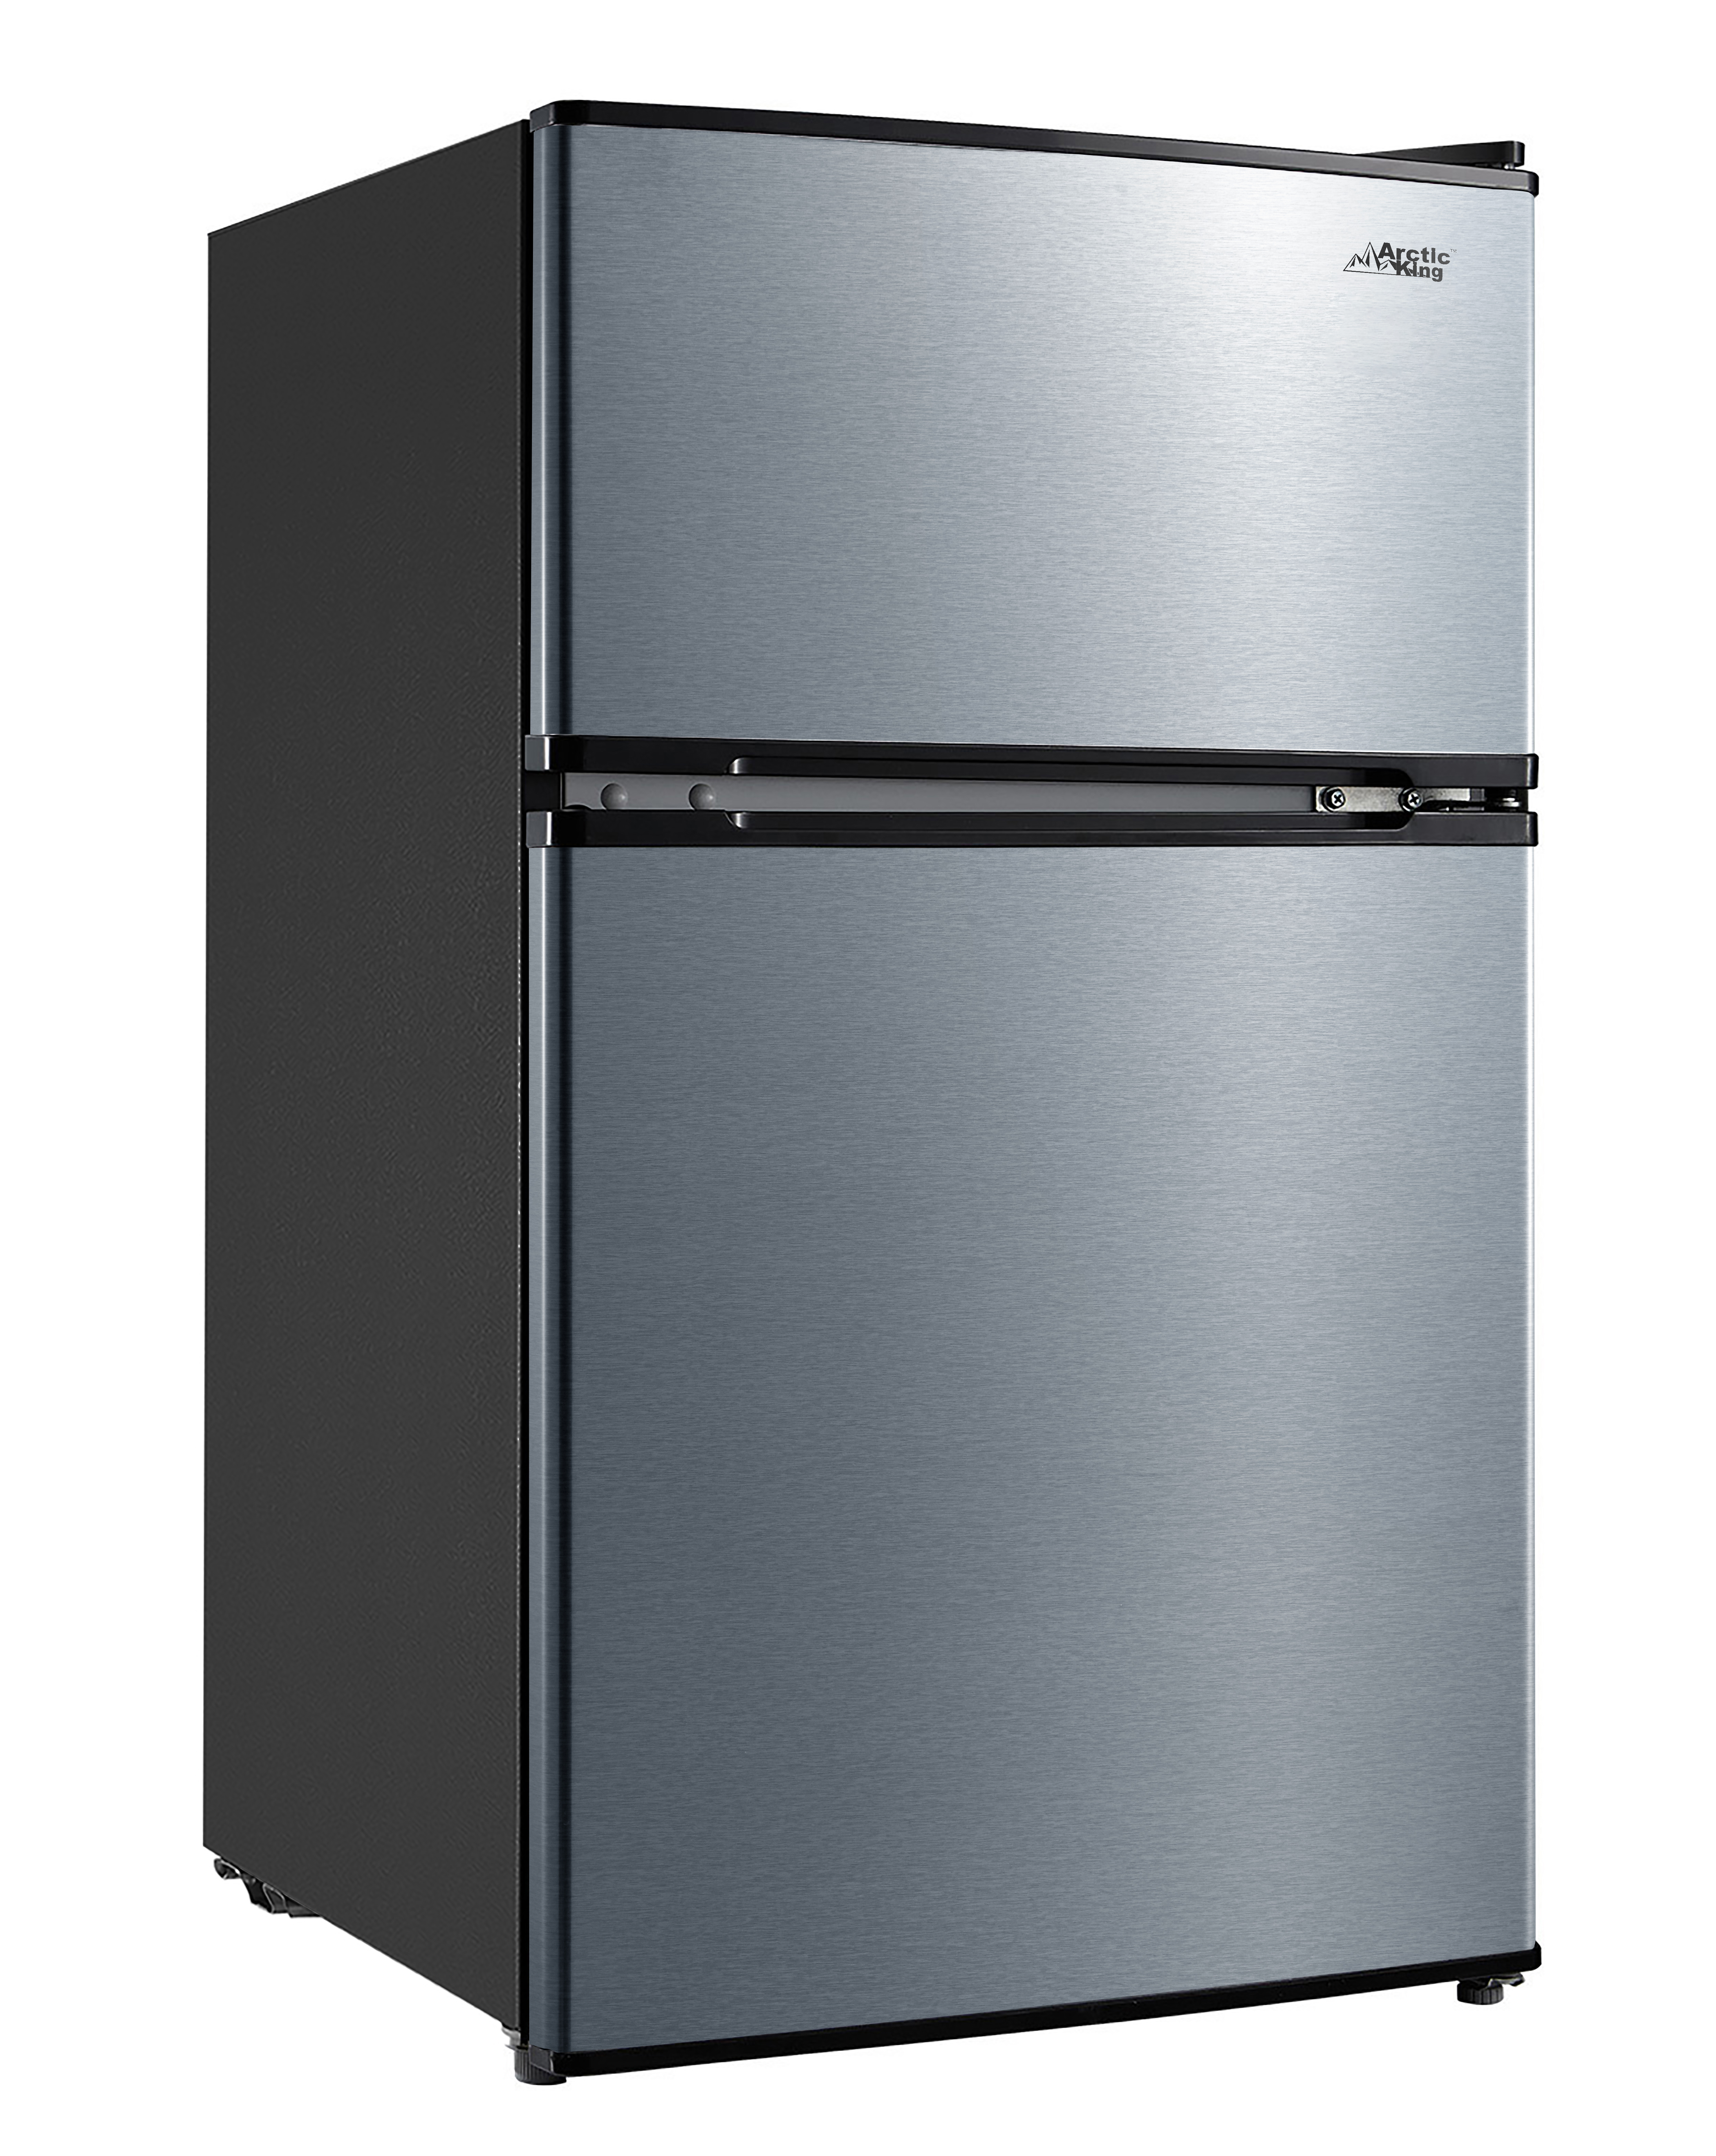 Arctic King 3.2 Cu ft Two Door Compact Refrigerator with Freezer, Black Stainless Steel look - image 2 of 18